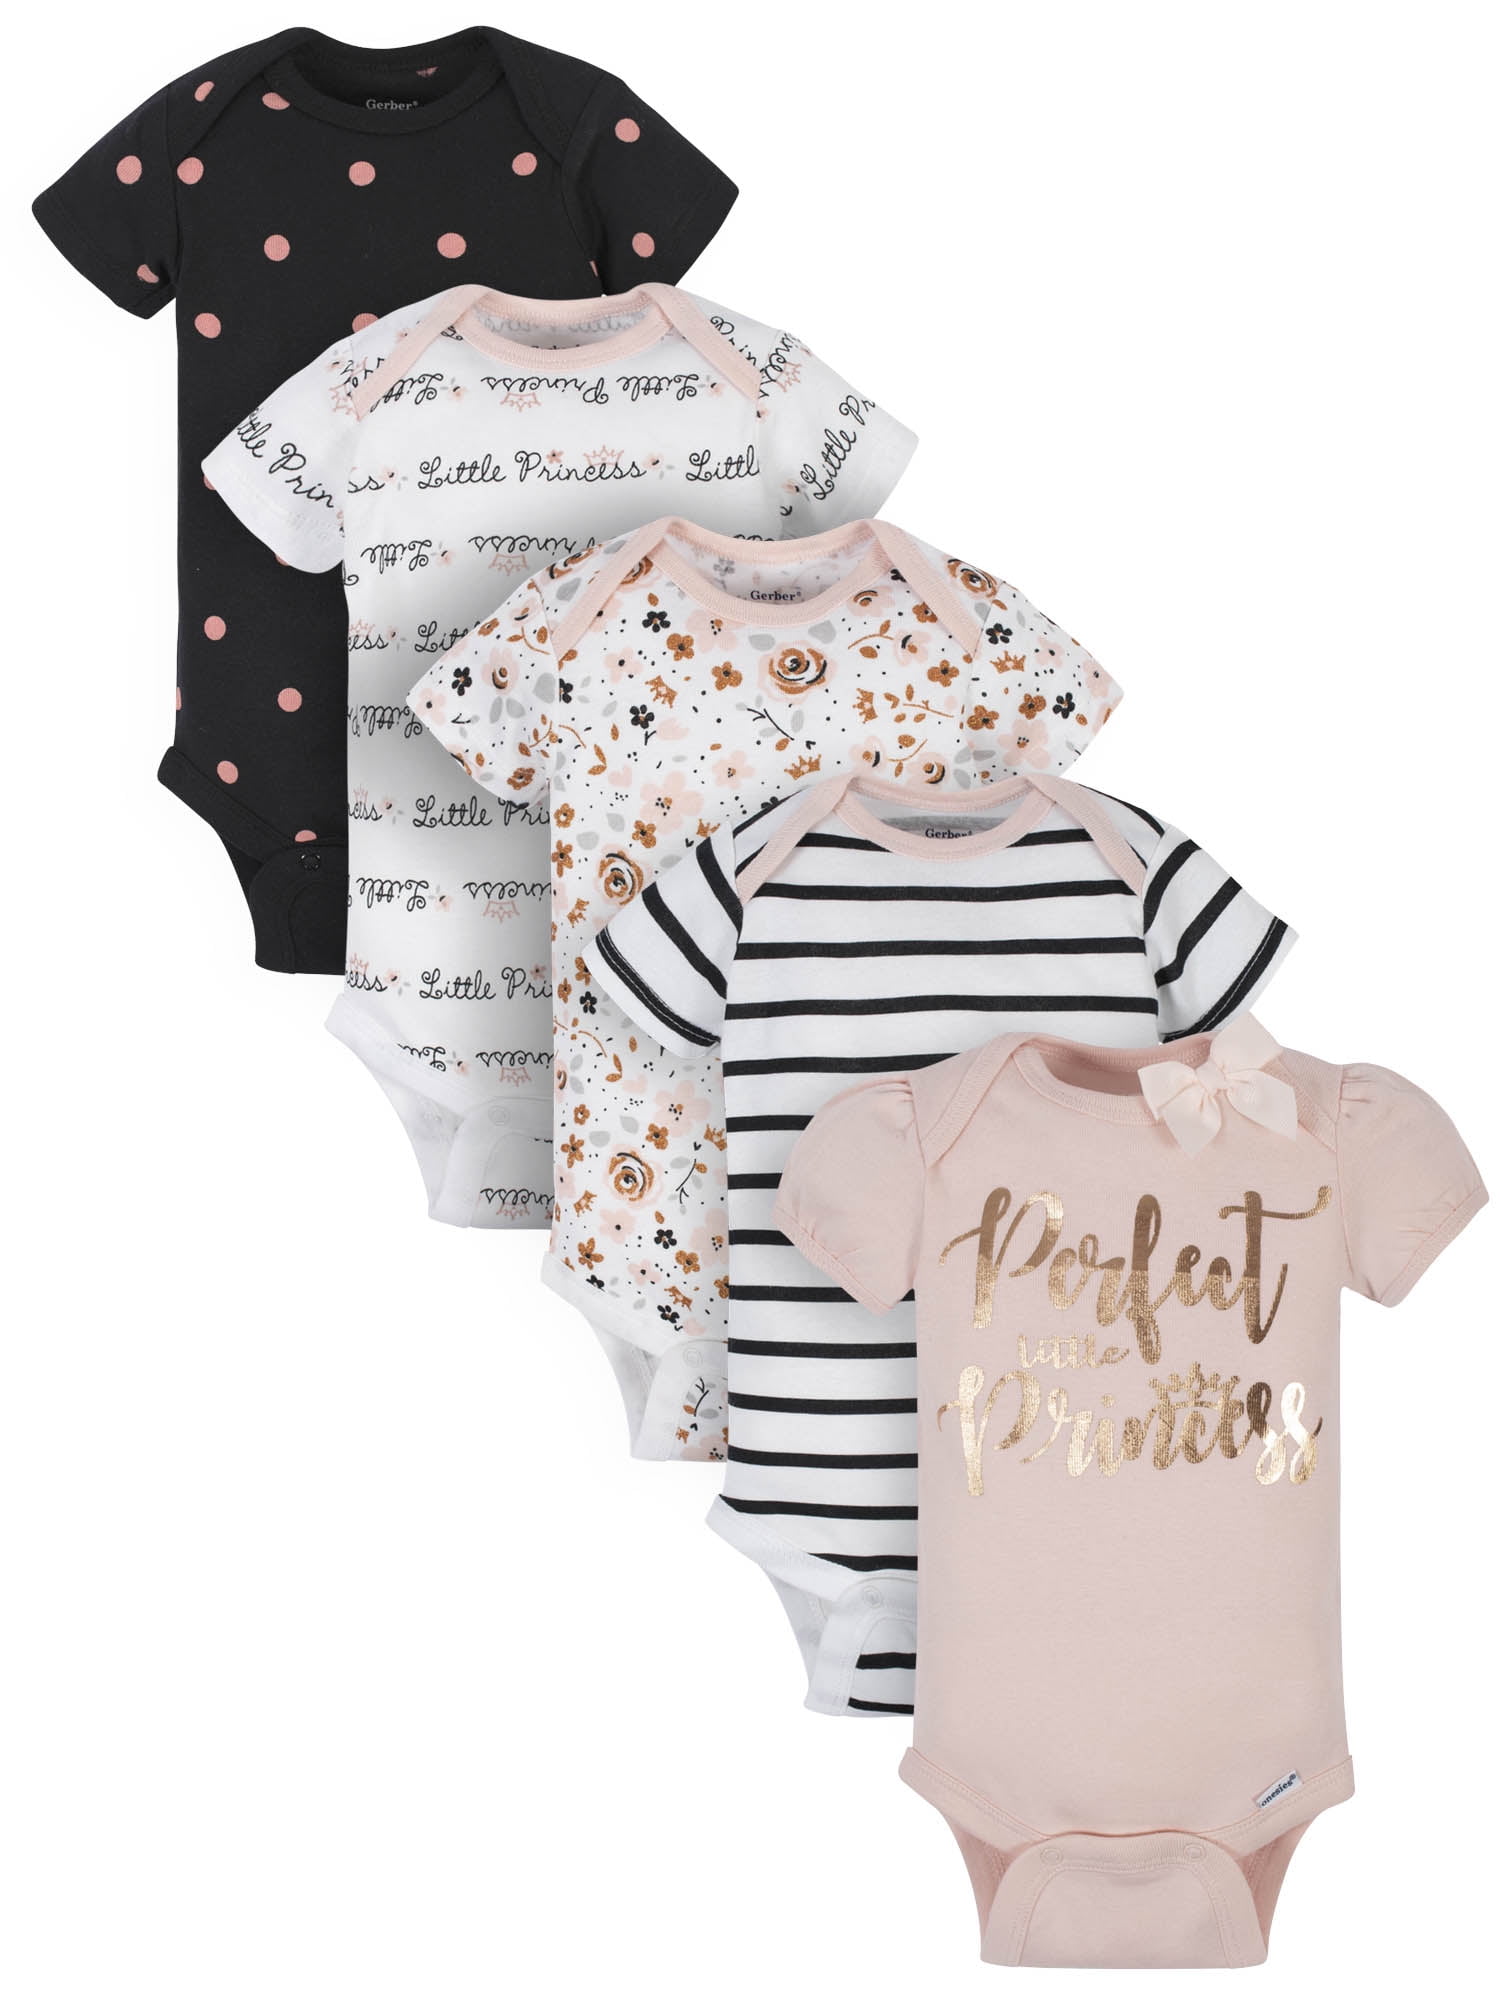 Infant Baby Girls Bodysuit Short-Sleeve Onesie The Statue Print Outfit Autumn Pajamas 